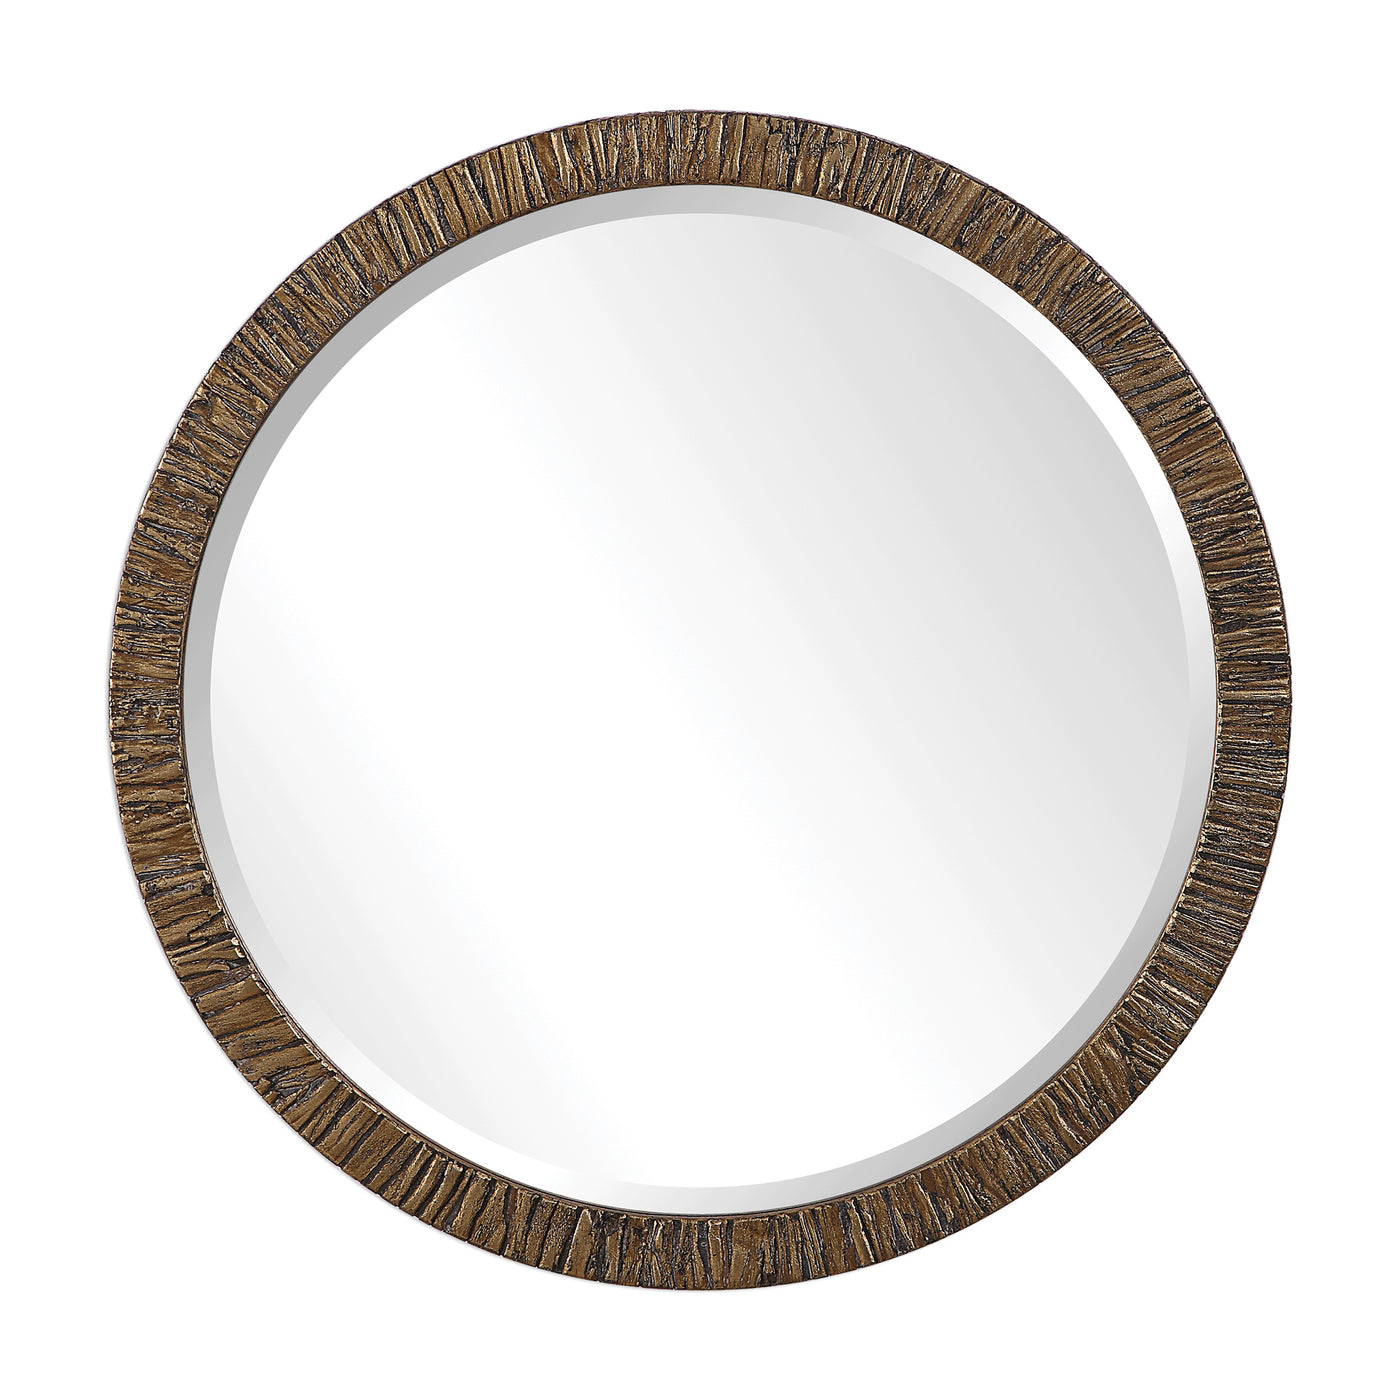 This Classic Round Mirror Showcases A Modern Style That Is Easy To Place In Any Design. The Solid Wood Frame Is Covered In...